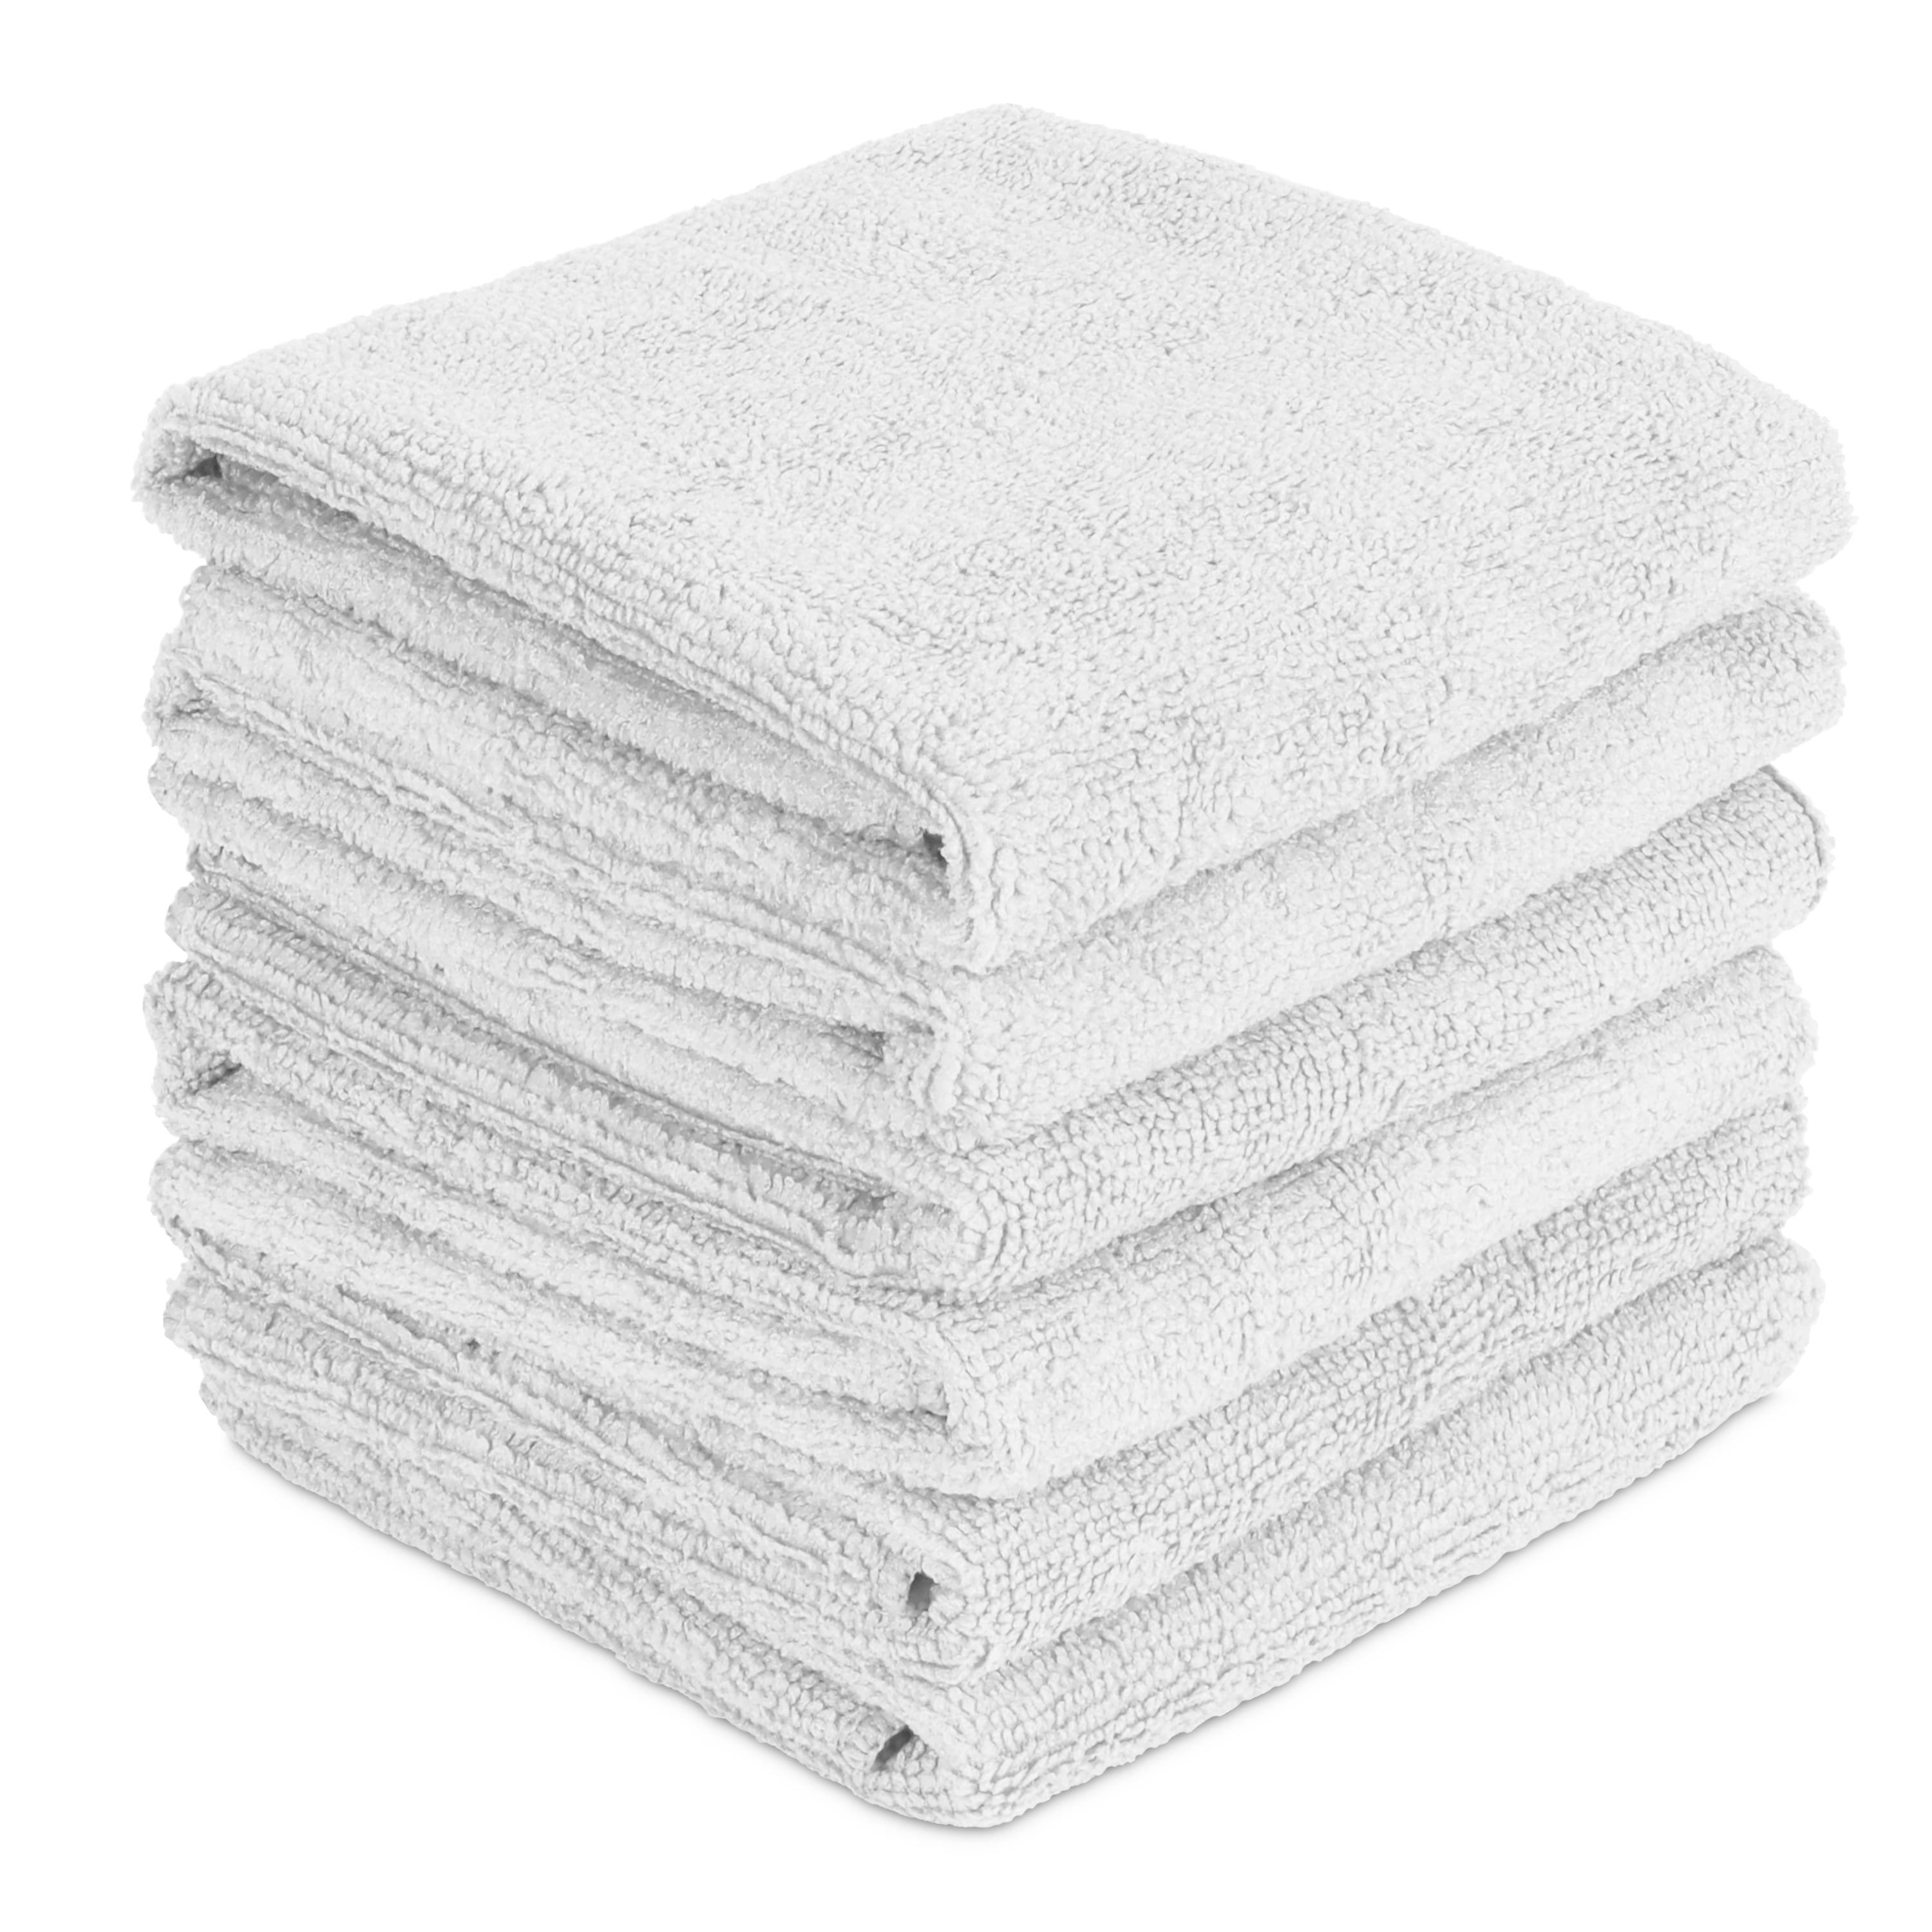 10 lbs new jumbo 16x18 100% cotton terry cloth towels cleaning supplies 